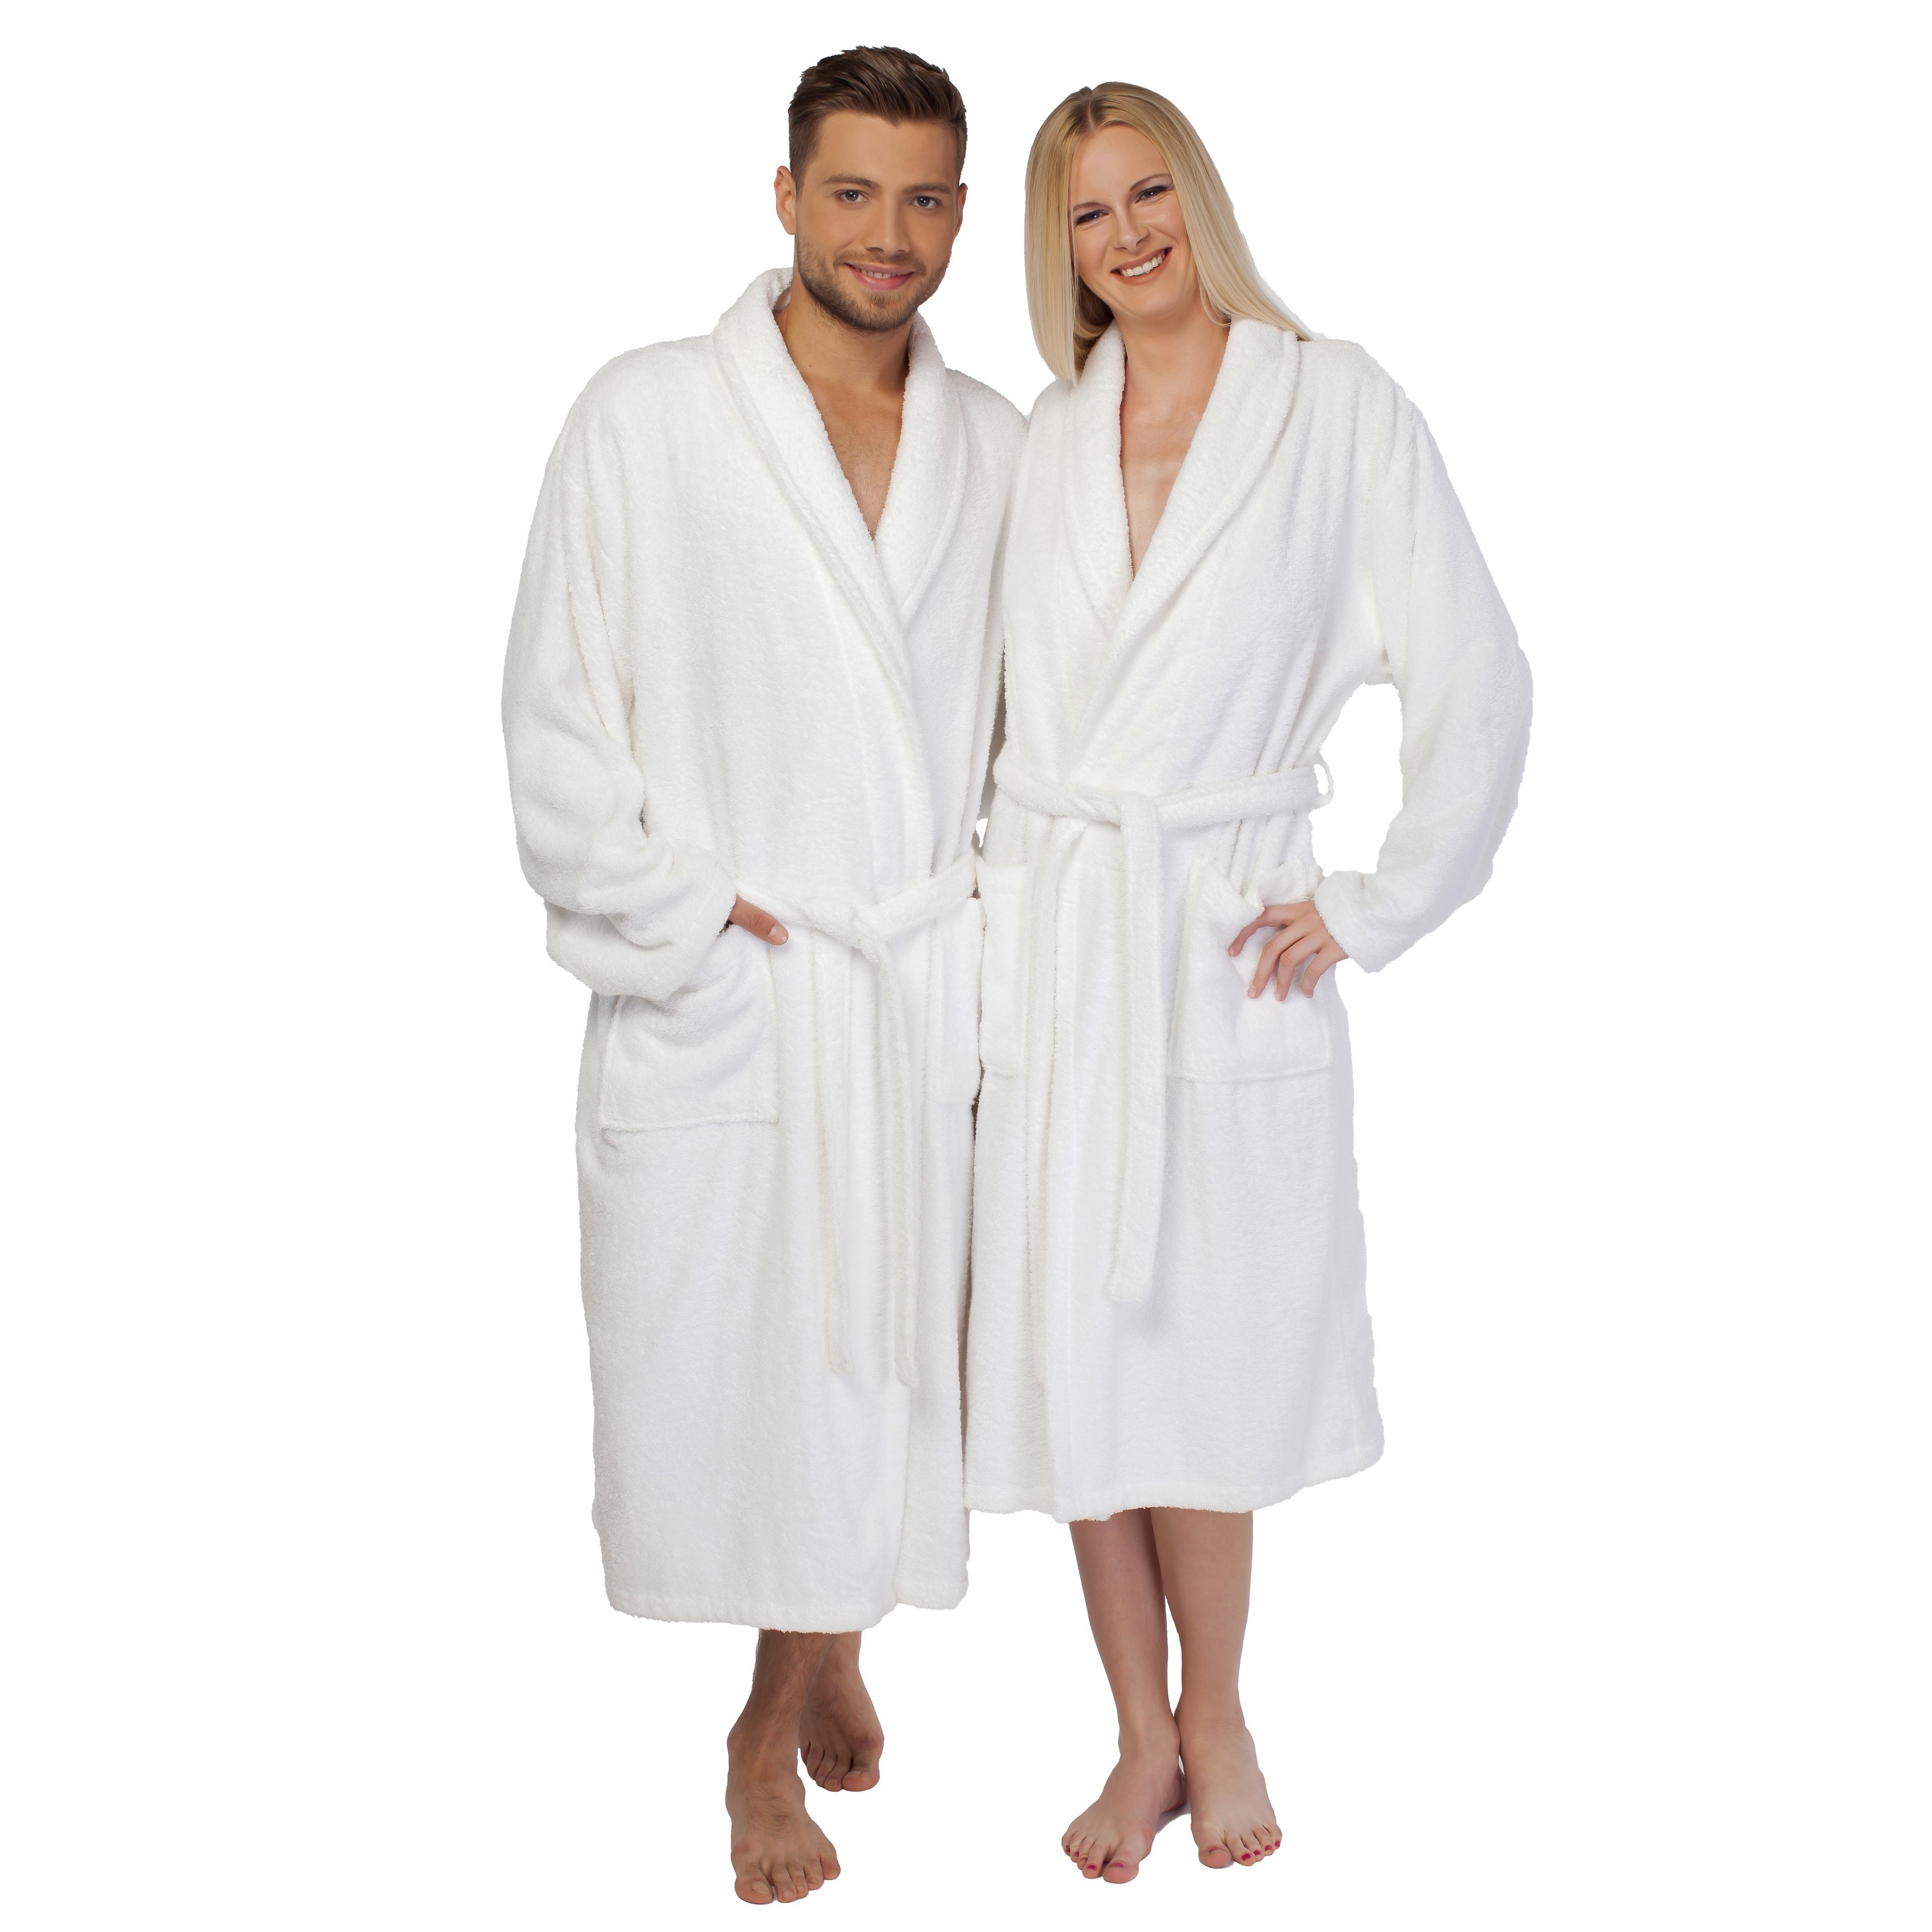 https://ak1.ostkcdn.com/images/products/4757191/Authentic-Hotel-Spa-Unisex-Turkish-Cotton-Terry-Cloth-Bath-Robe-Multiple-Colors-Available-167a4bb1-f454-48e5-b316-13330a956881.jpg